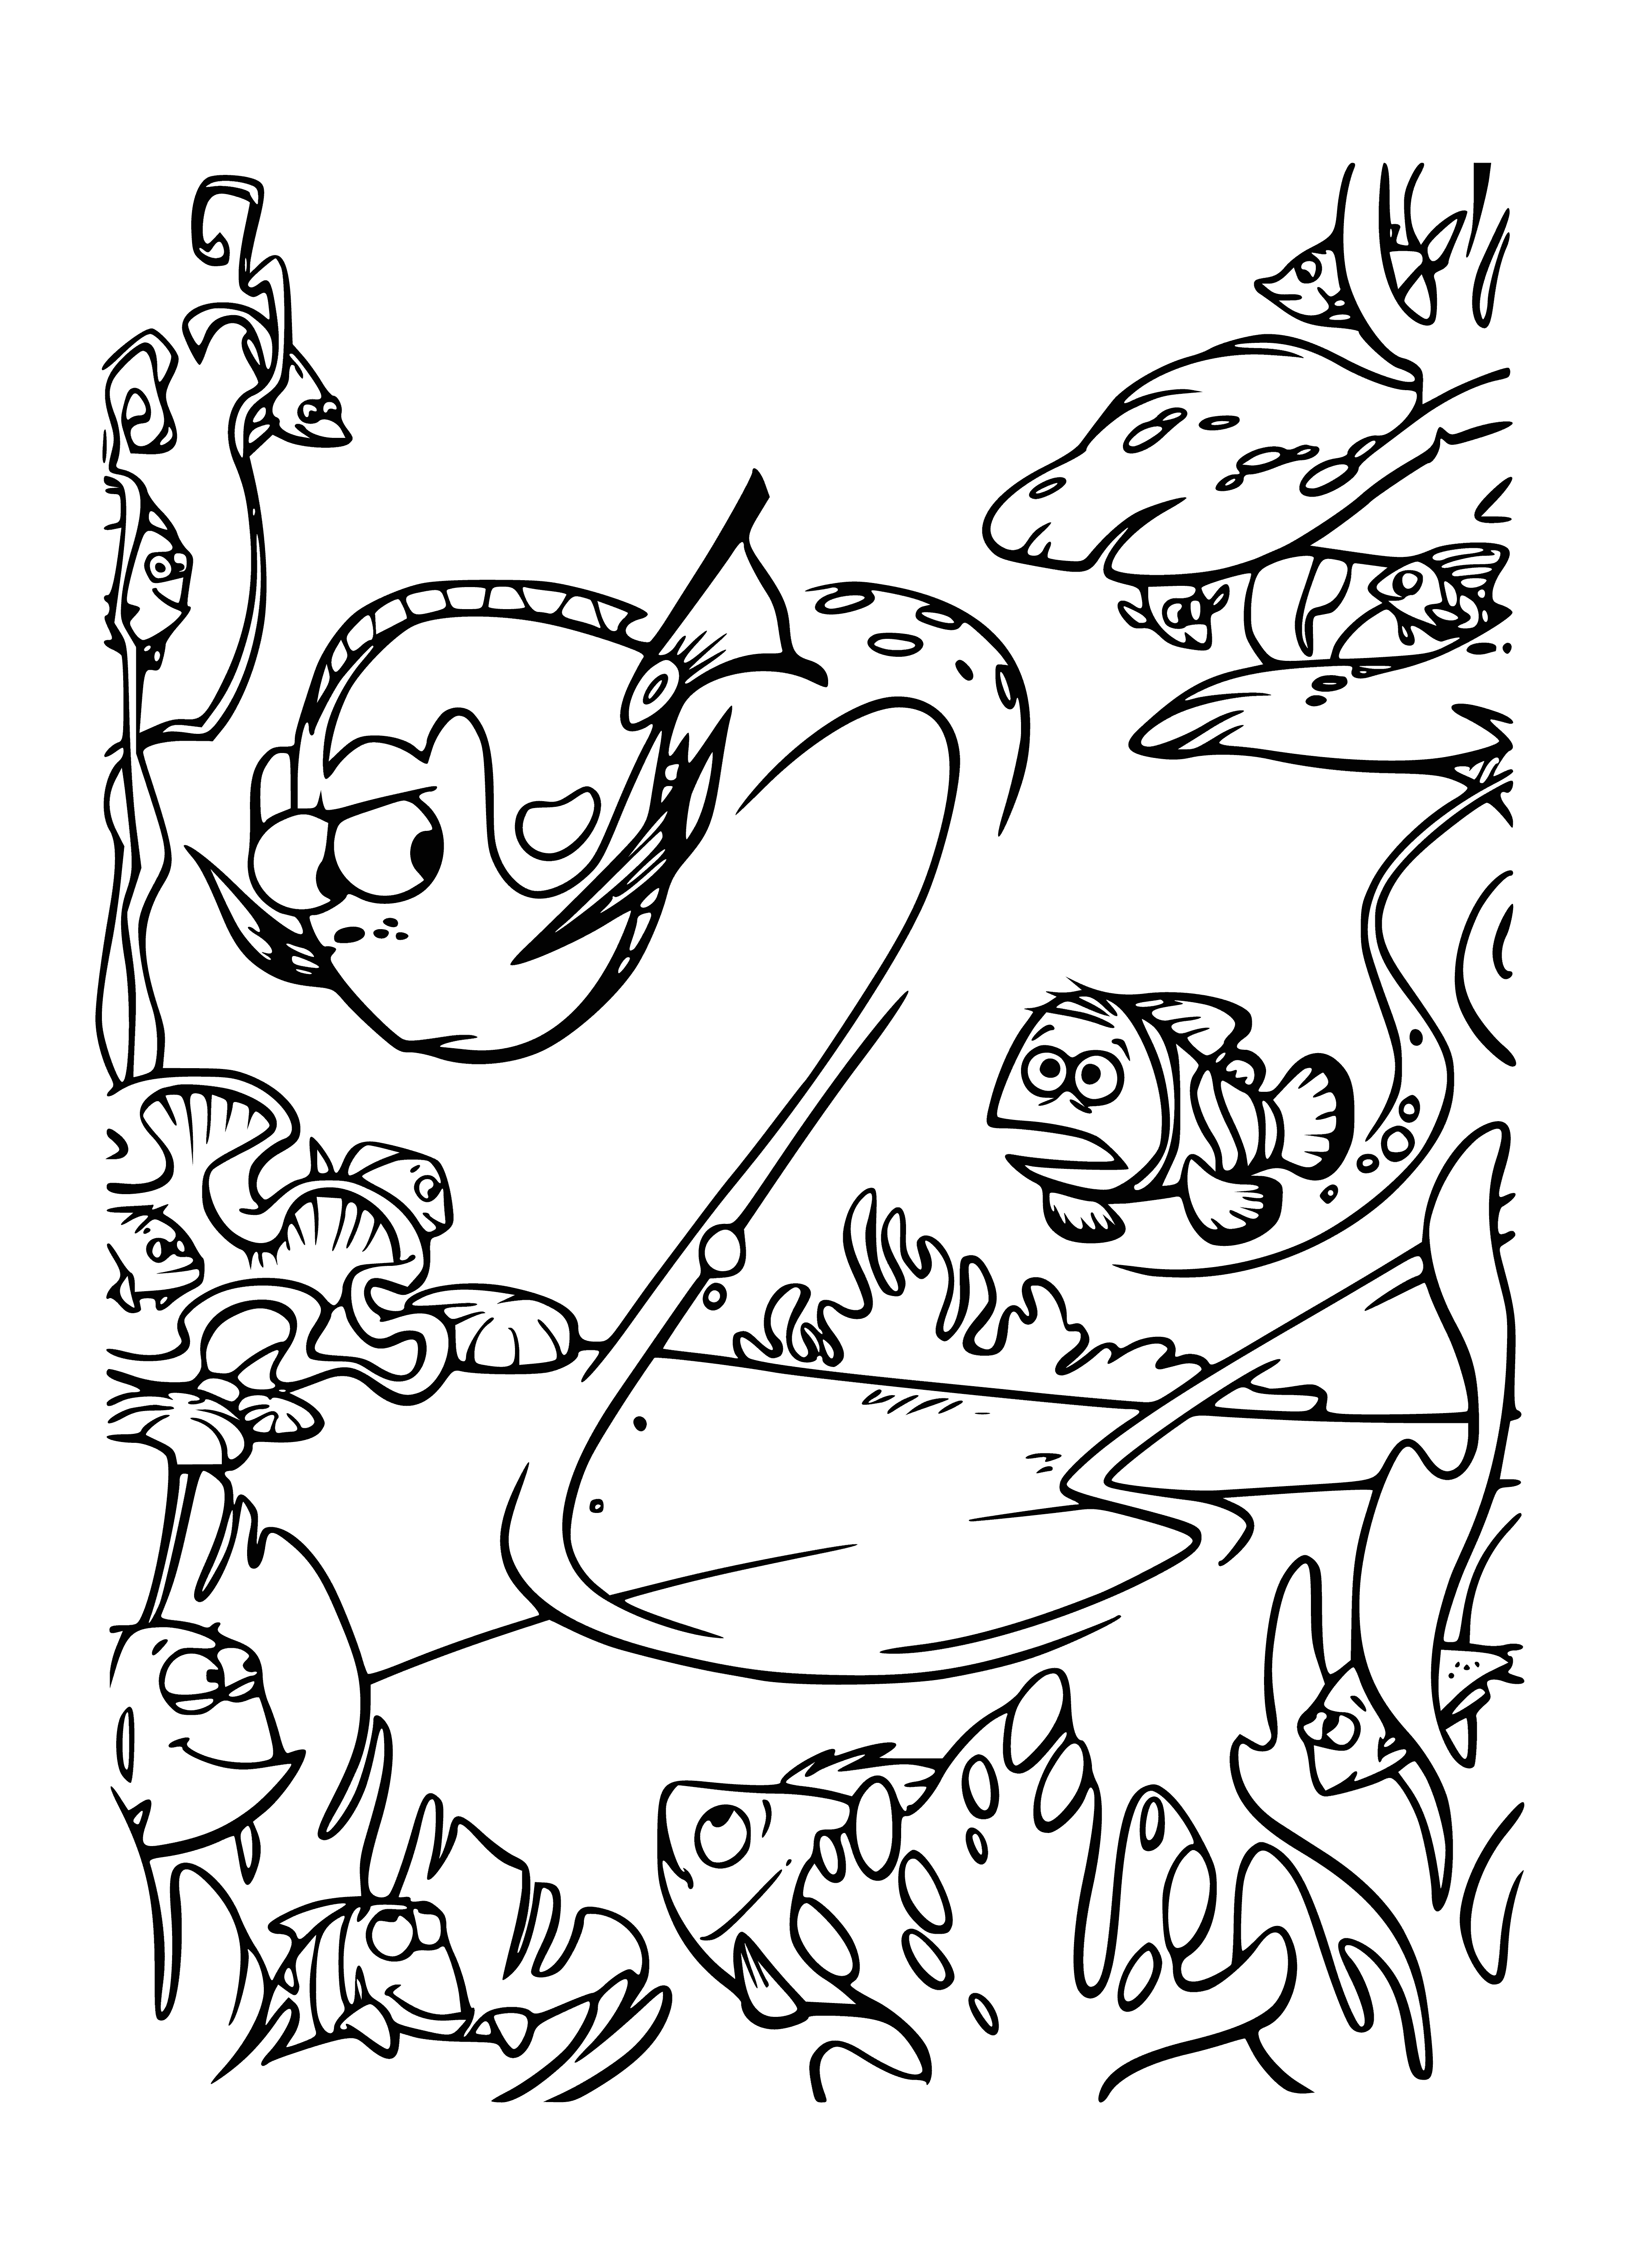 coloring page: Coloring page of blue fish with white spots, long curly tail, big mouth & small eyes. Swimming in the water.